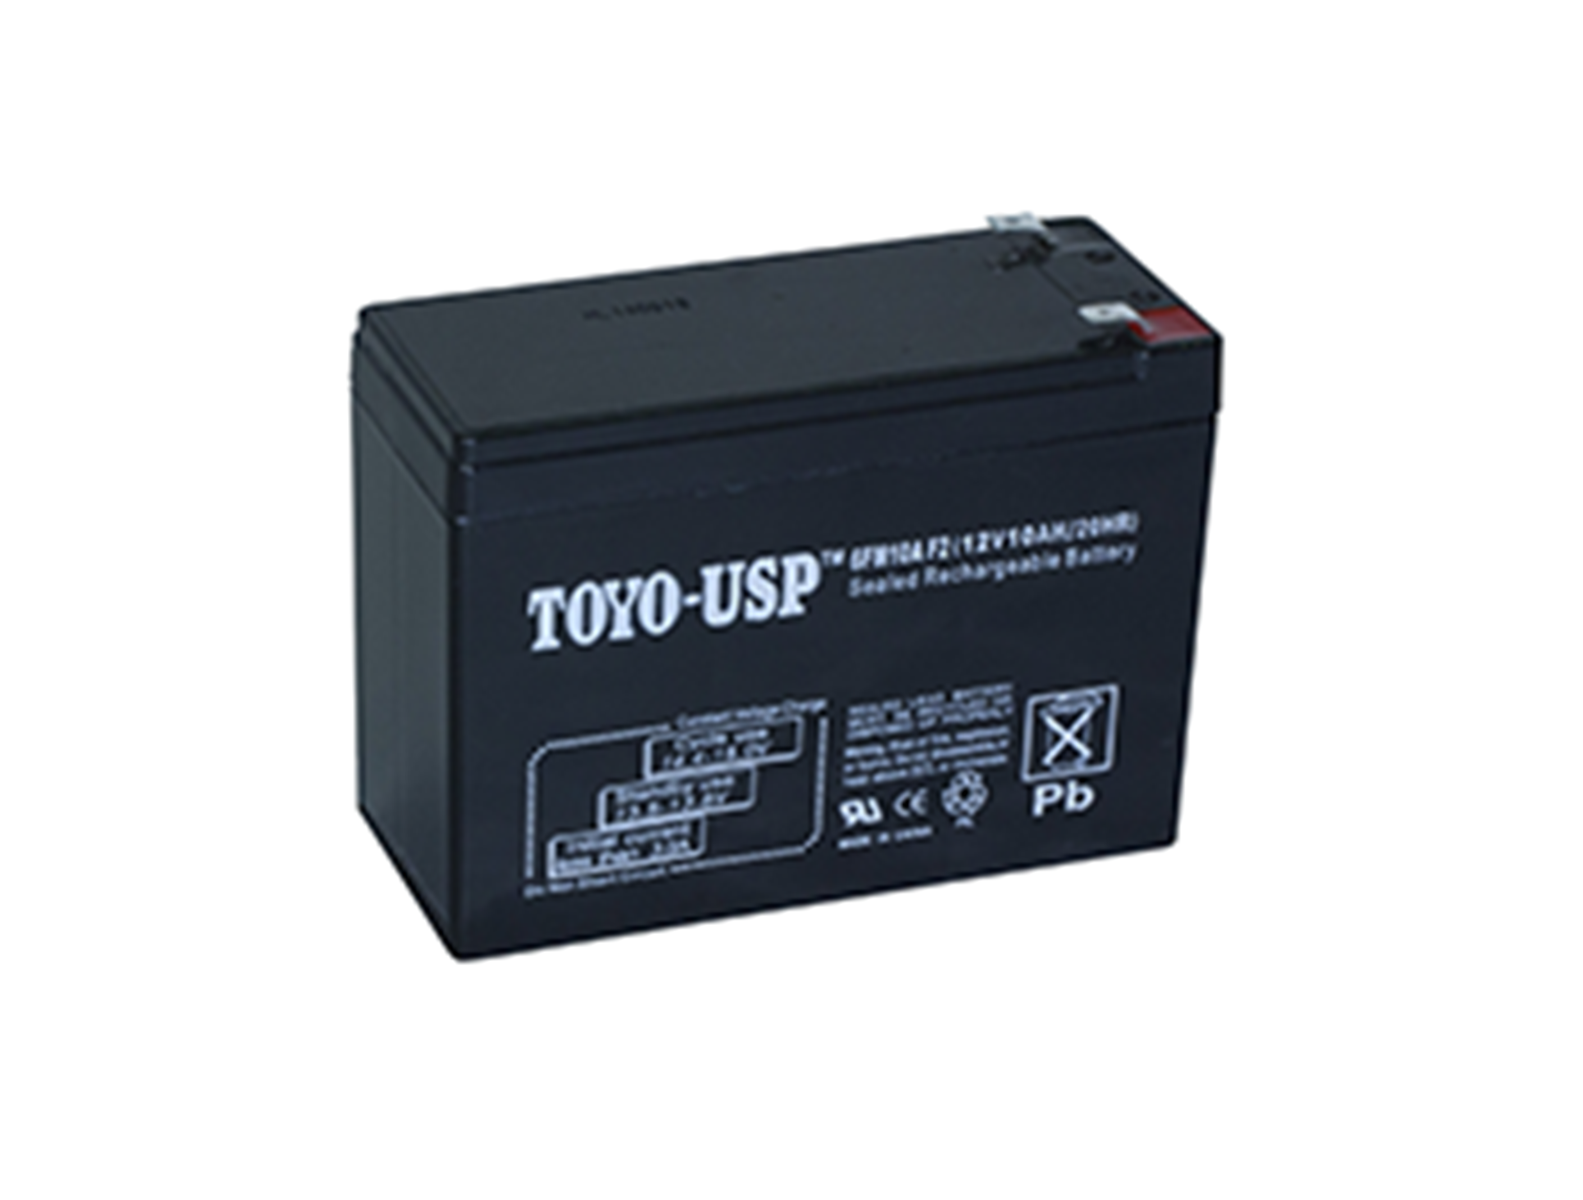 TOYO Sealed Lead Acid Battery 12V 10AH (6FM10) (Call To Order)